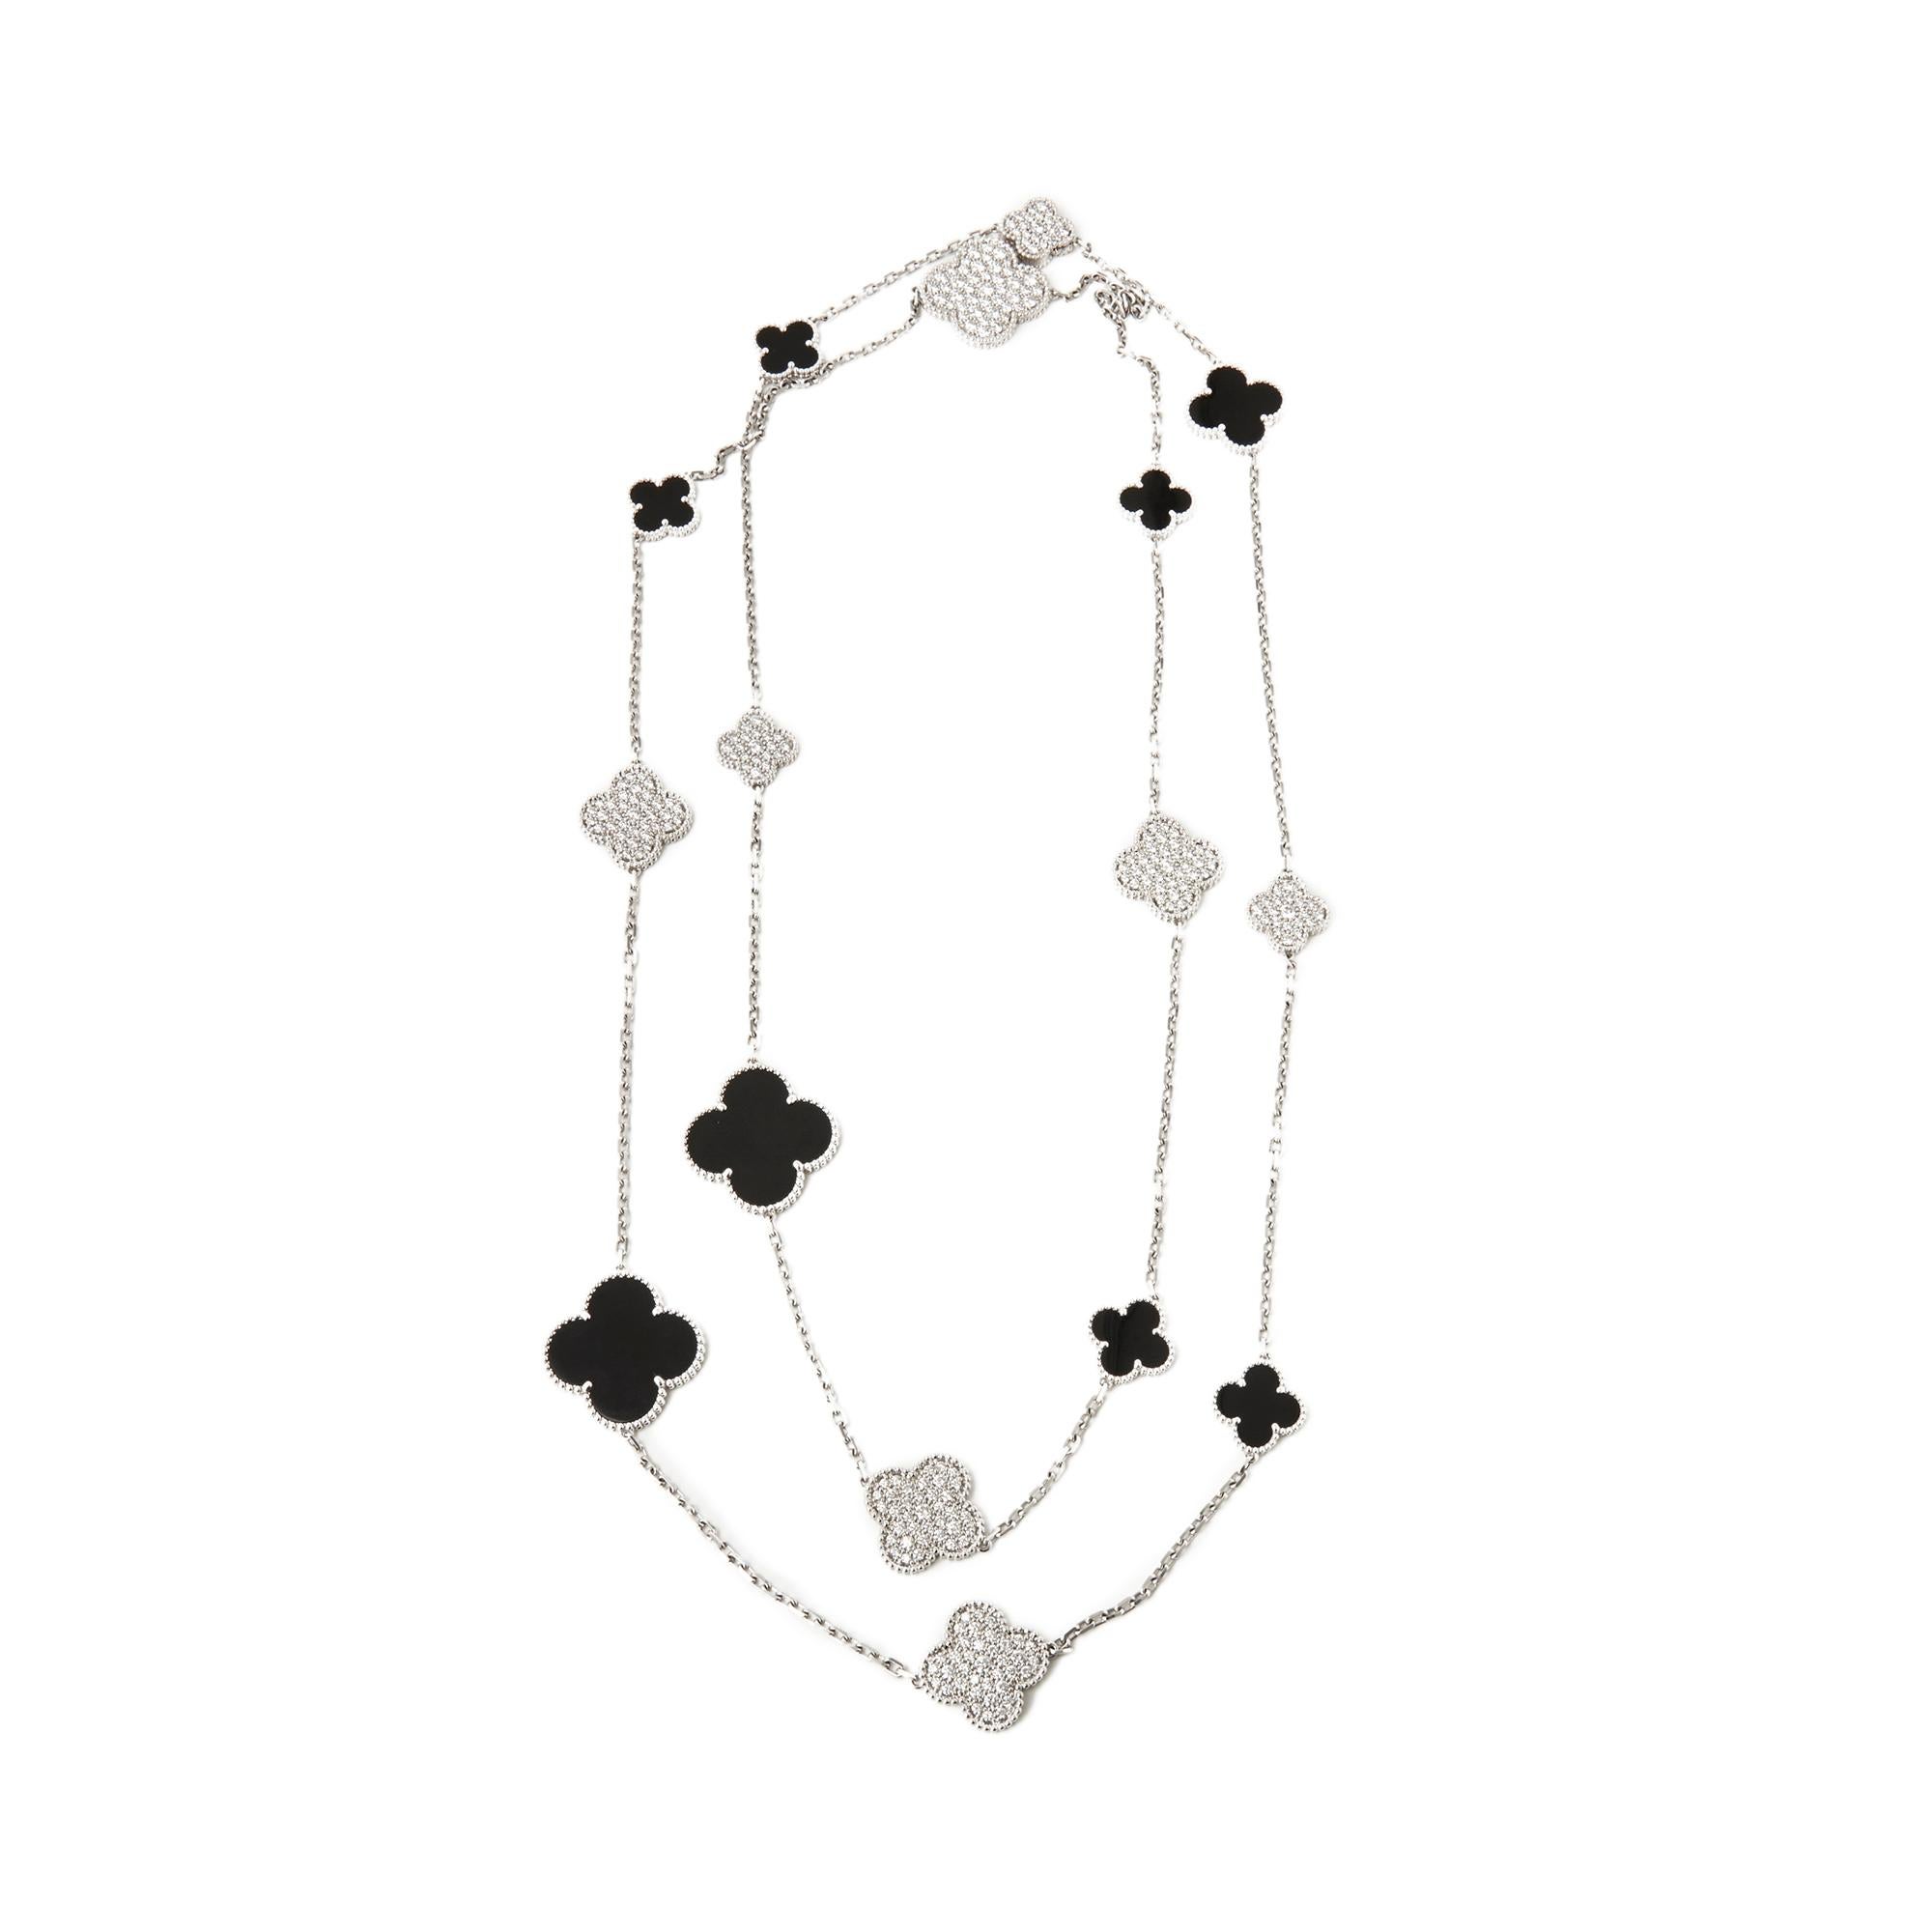 Code: COM2066
Brand: Van Cleef & Arpels
Description: 18k White Gold Onyx & Diamond Limited Edition Fifth Avenue Magic Alhambra Necklace
Accompanied With: Certificate & Presentation Box
Gender: Ladies
Necklace Length: 122cm
Necklace Width: